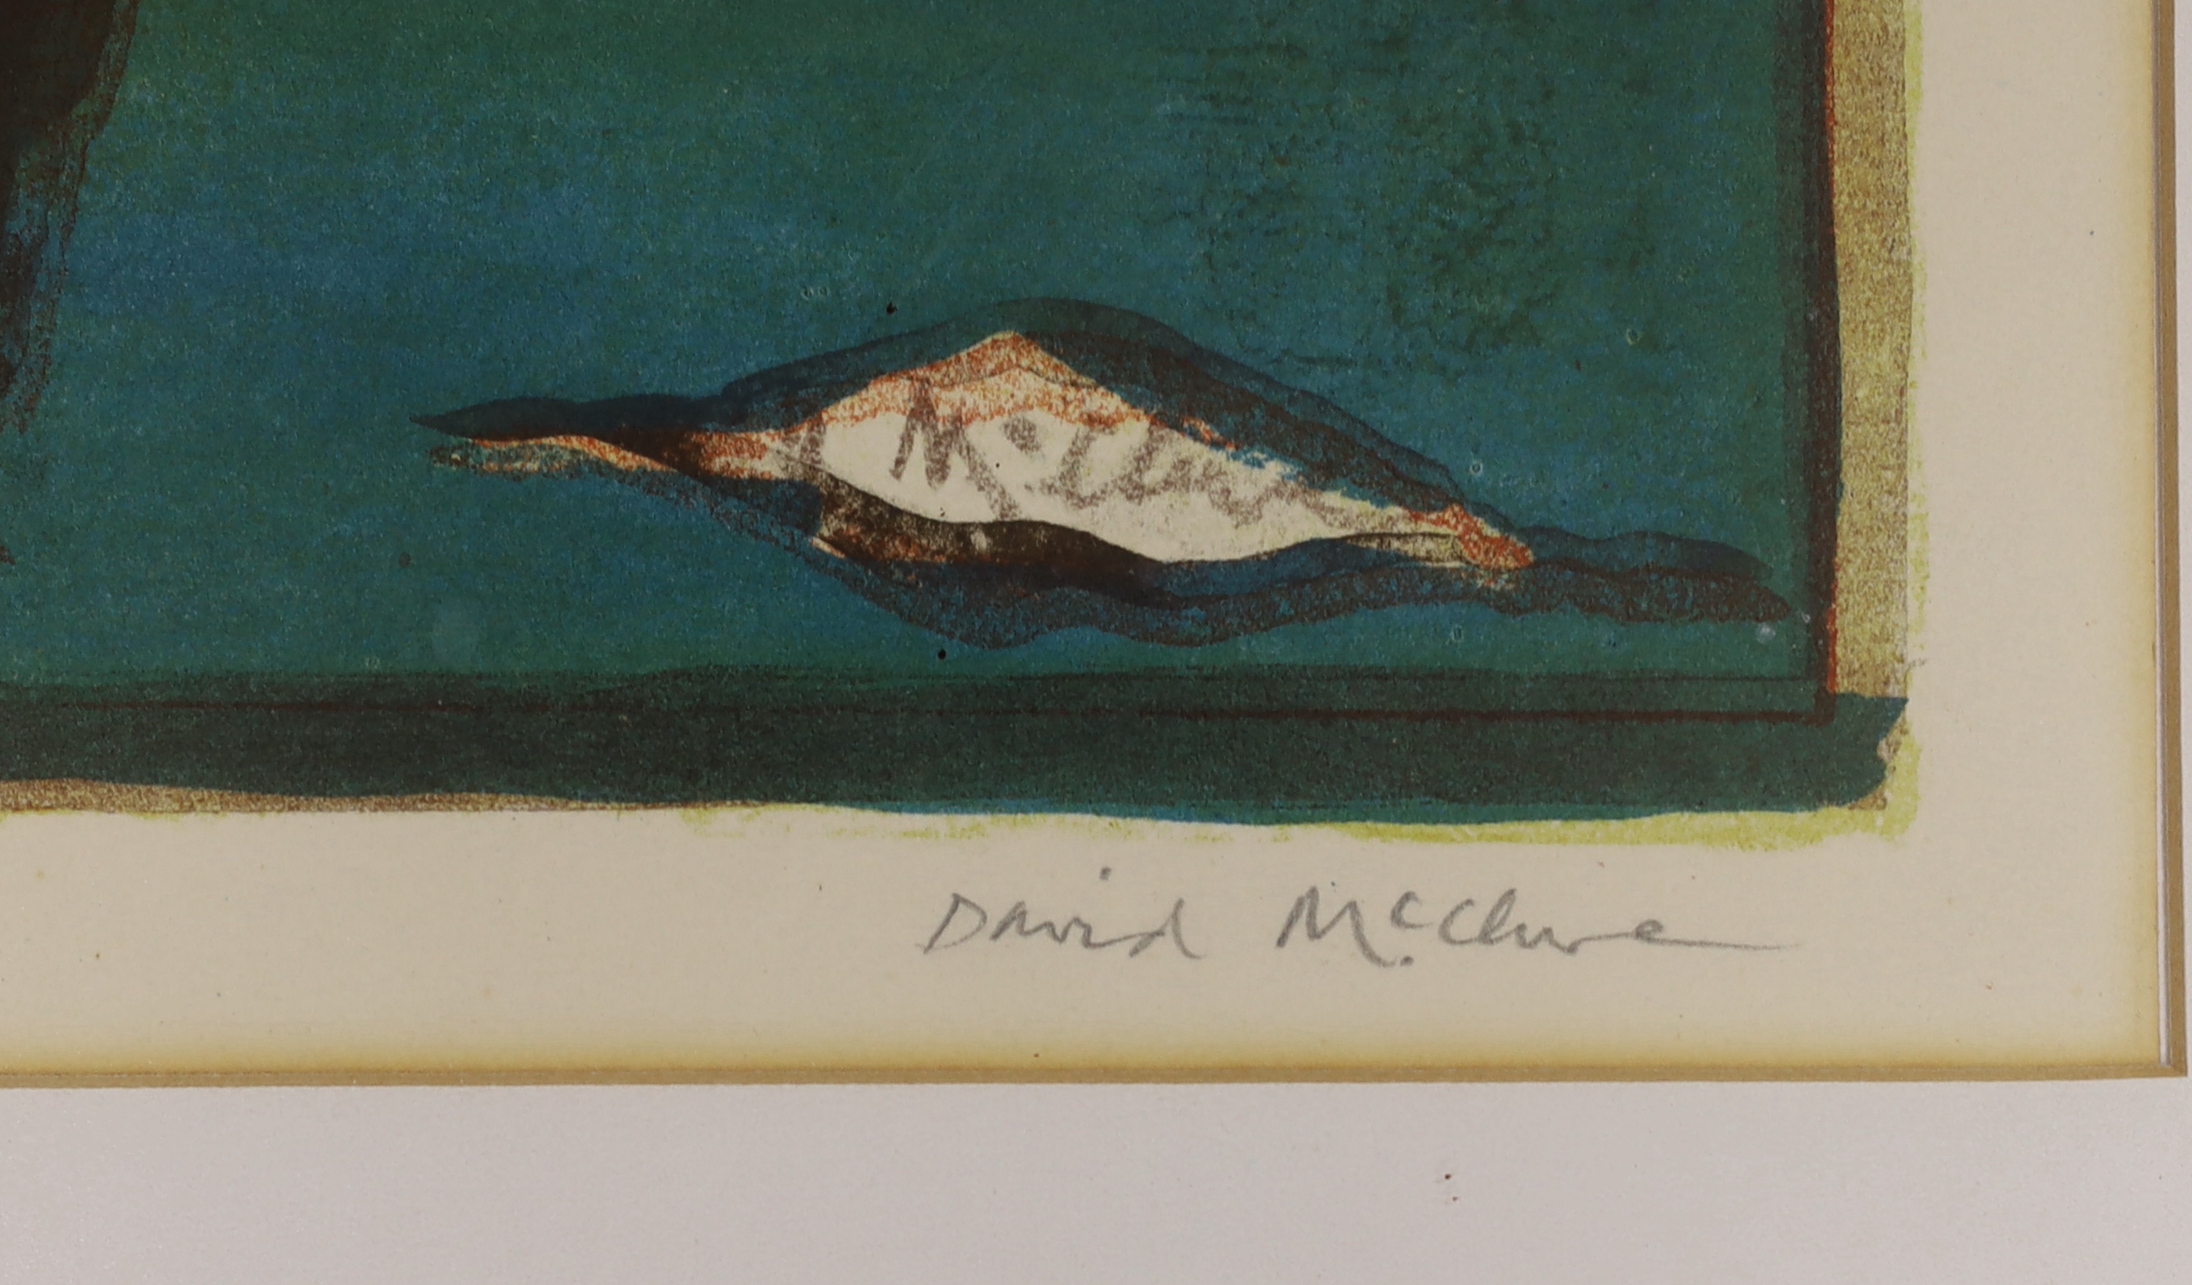 David McClure (1926-1998), colour screenprint, 'Moonlight Sonata', signed in pencil, limited edition - Image 3 of 4